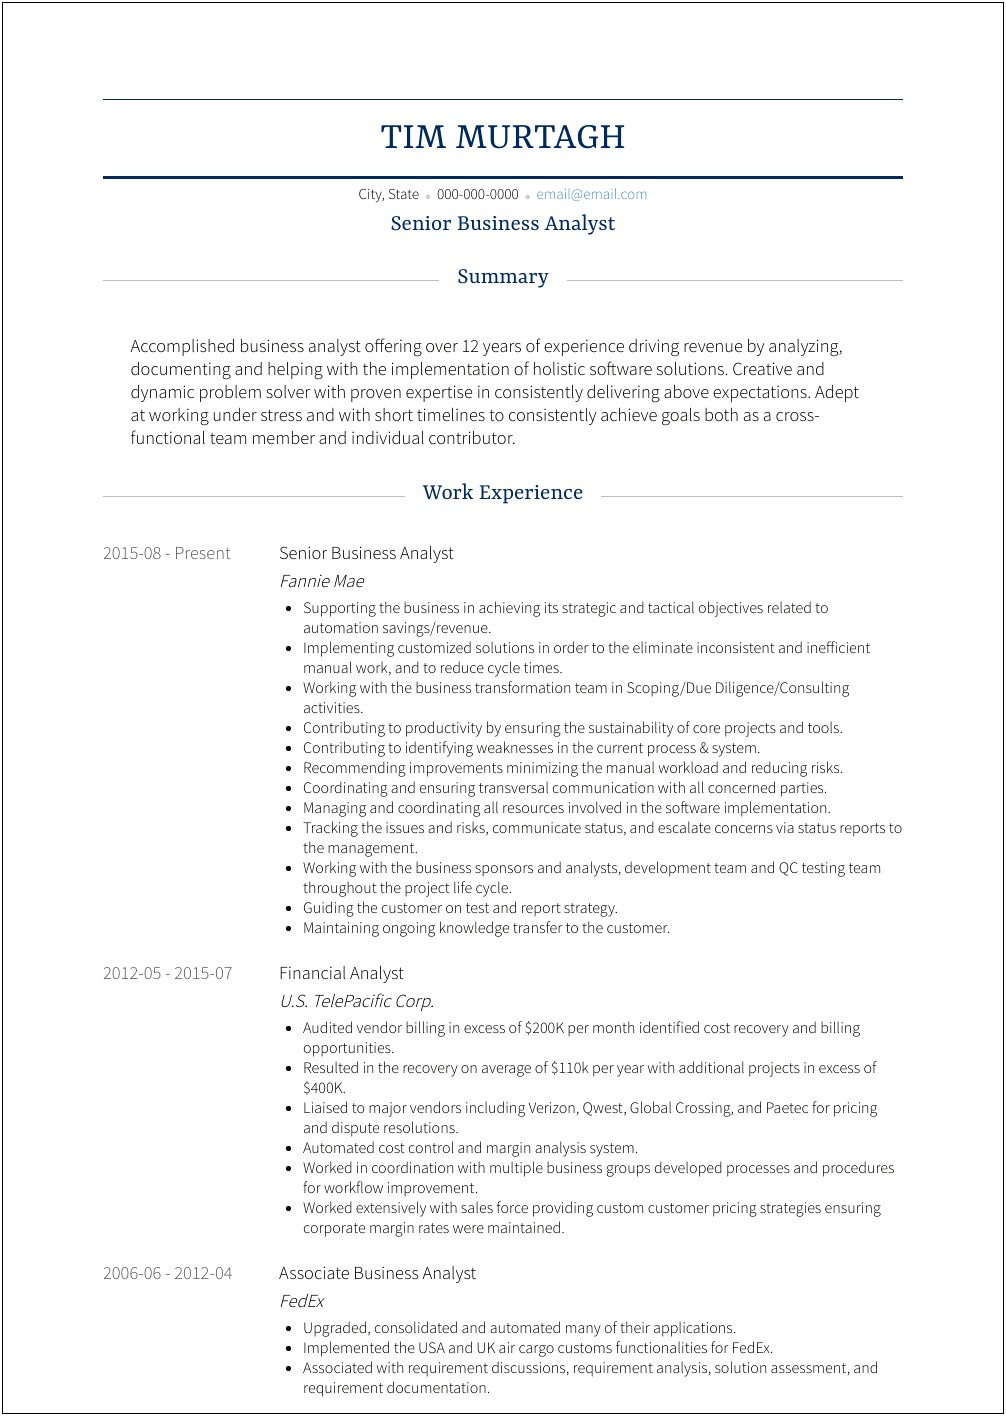 Functional Resume Sample For Business Analyst